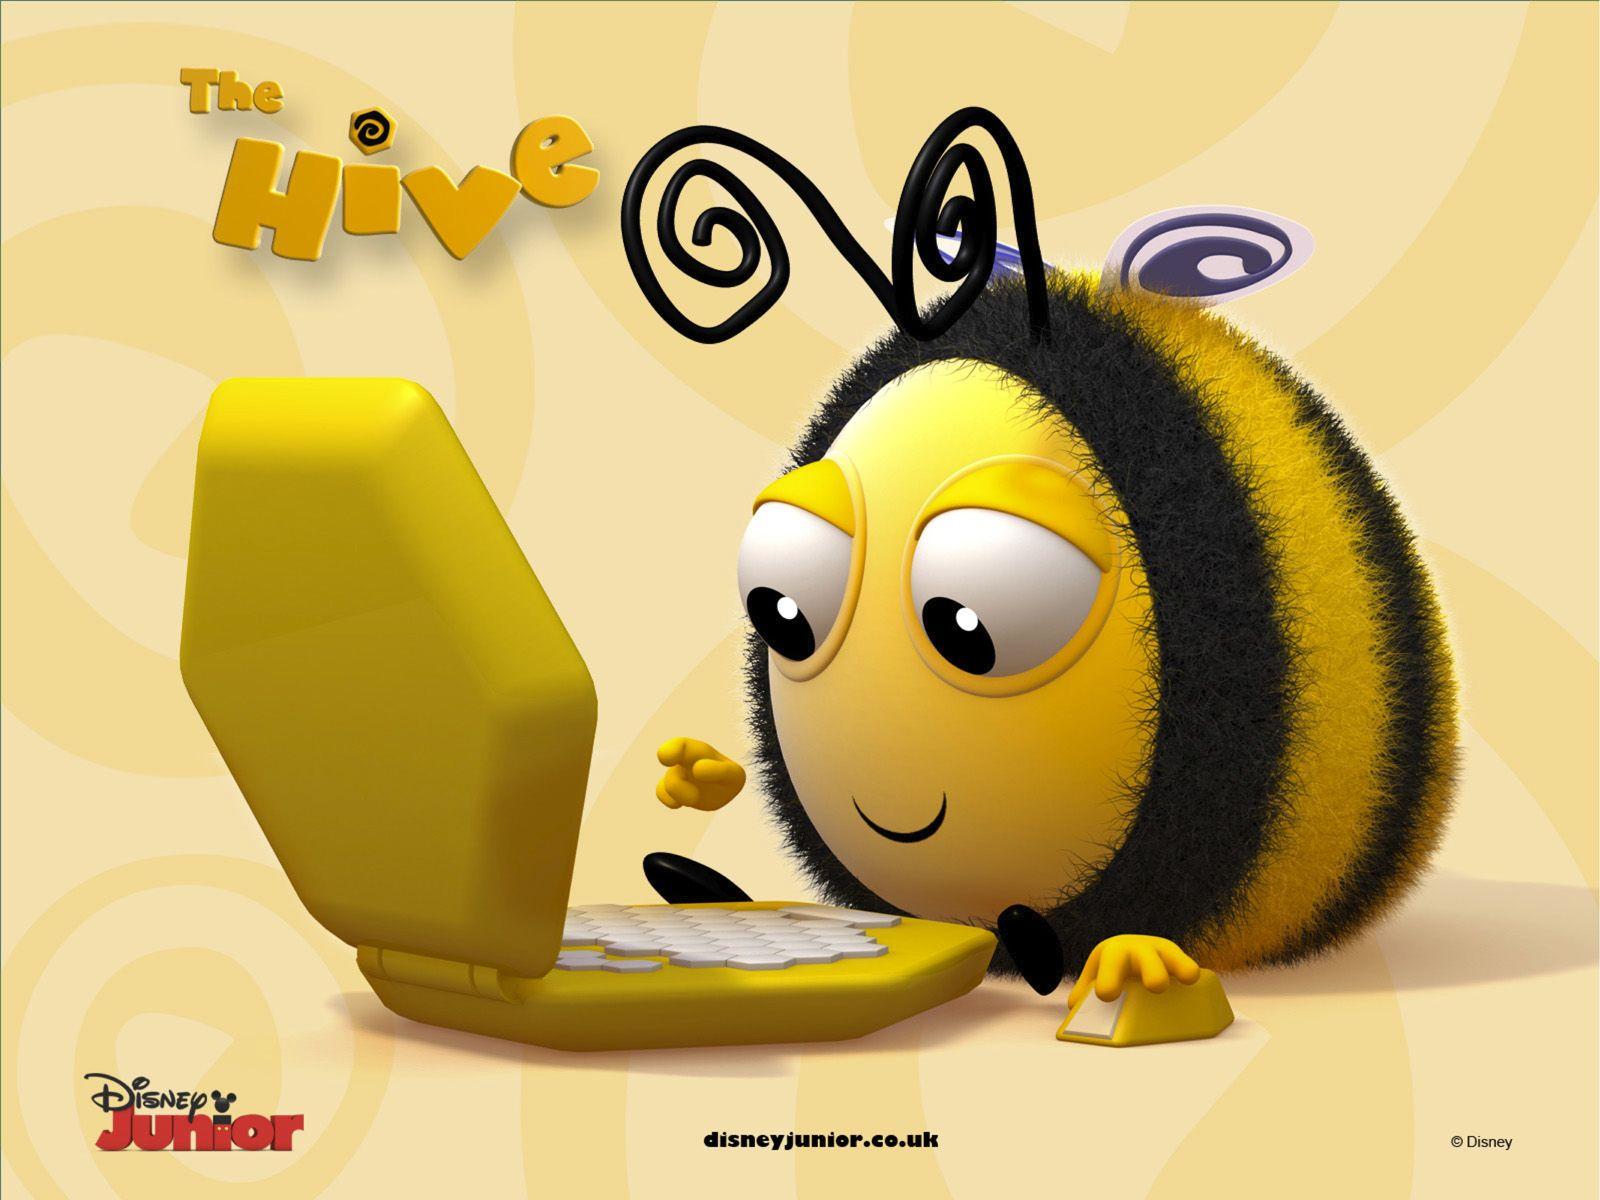 Cinedigm Acquires Rights to Disney Junior's The Hive Licensing